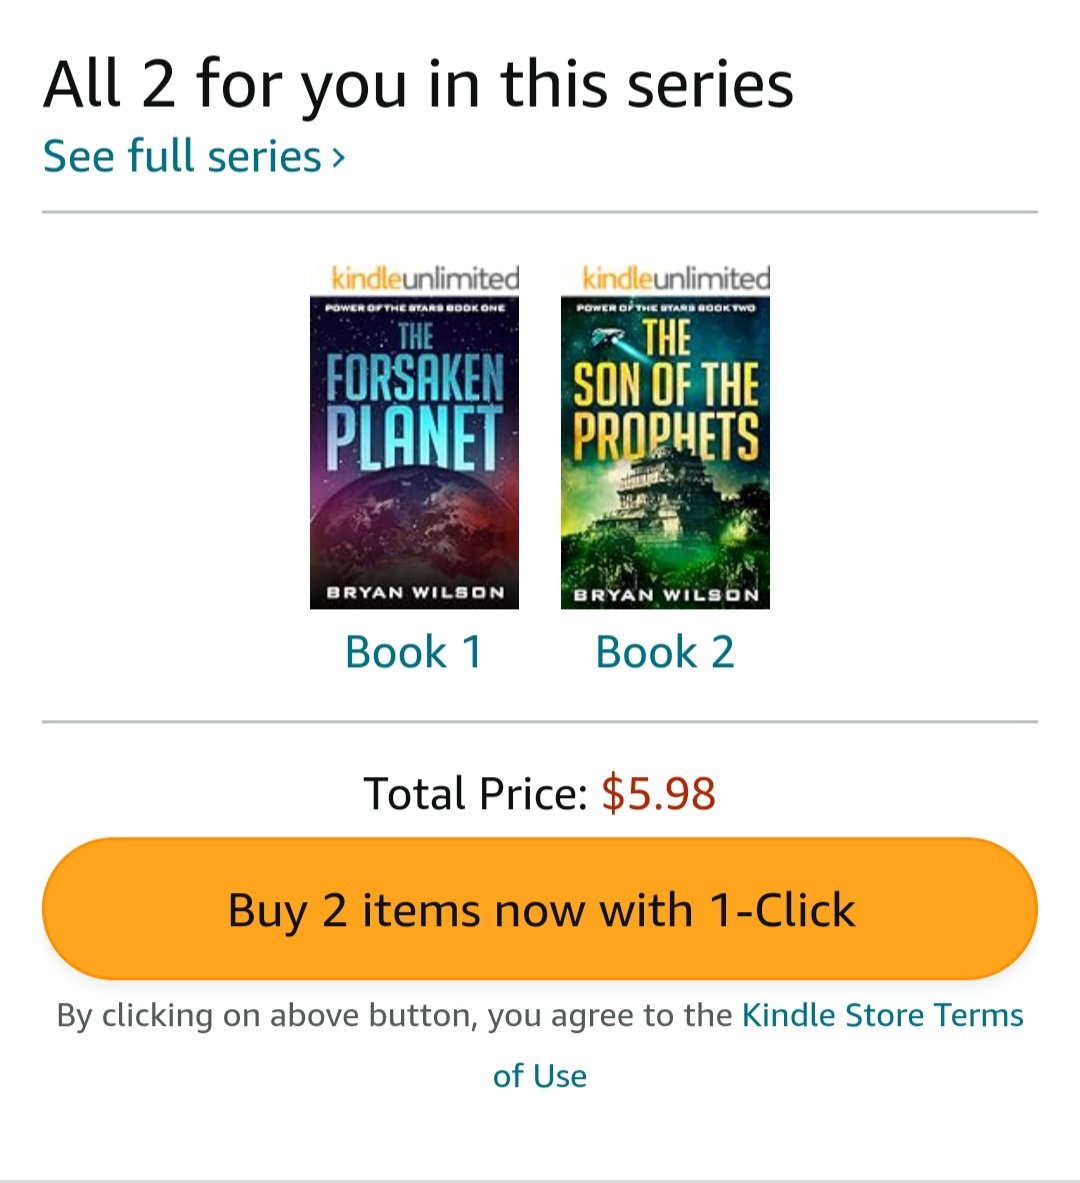 To any US or UK kindle readers, today is the last day to get the first book of my series on the cheap. If you like sci-fantasy space operas, don't miss out!